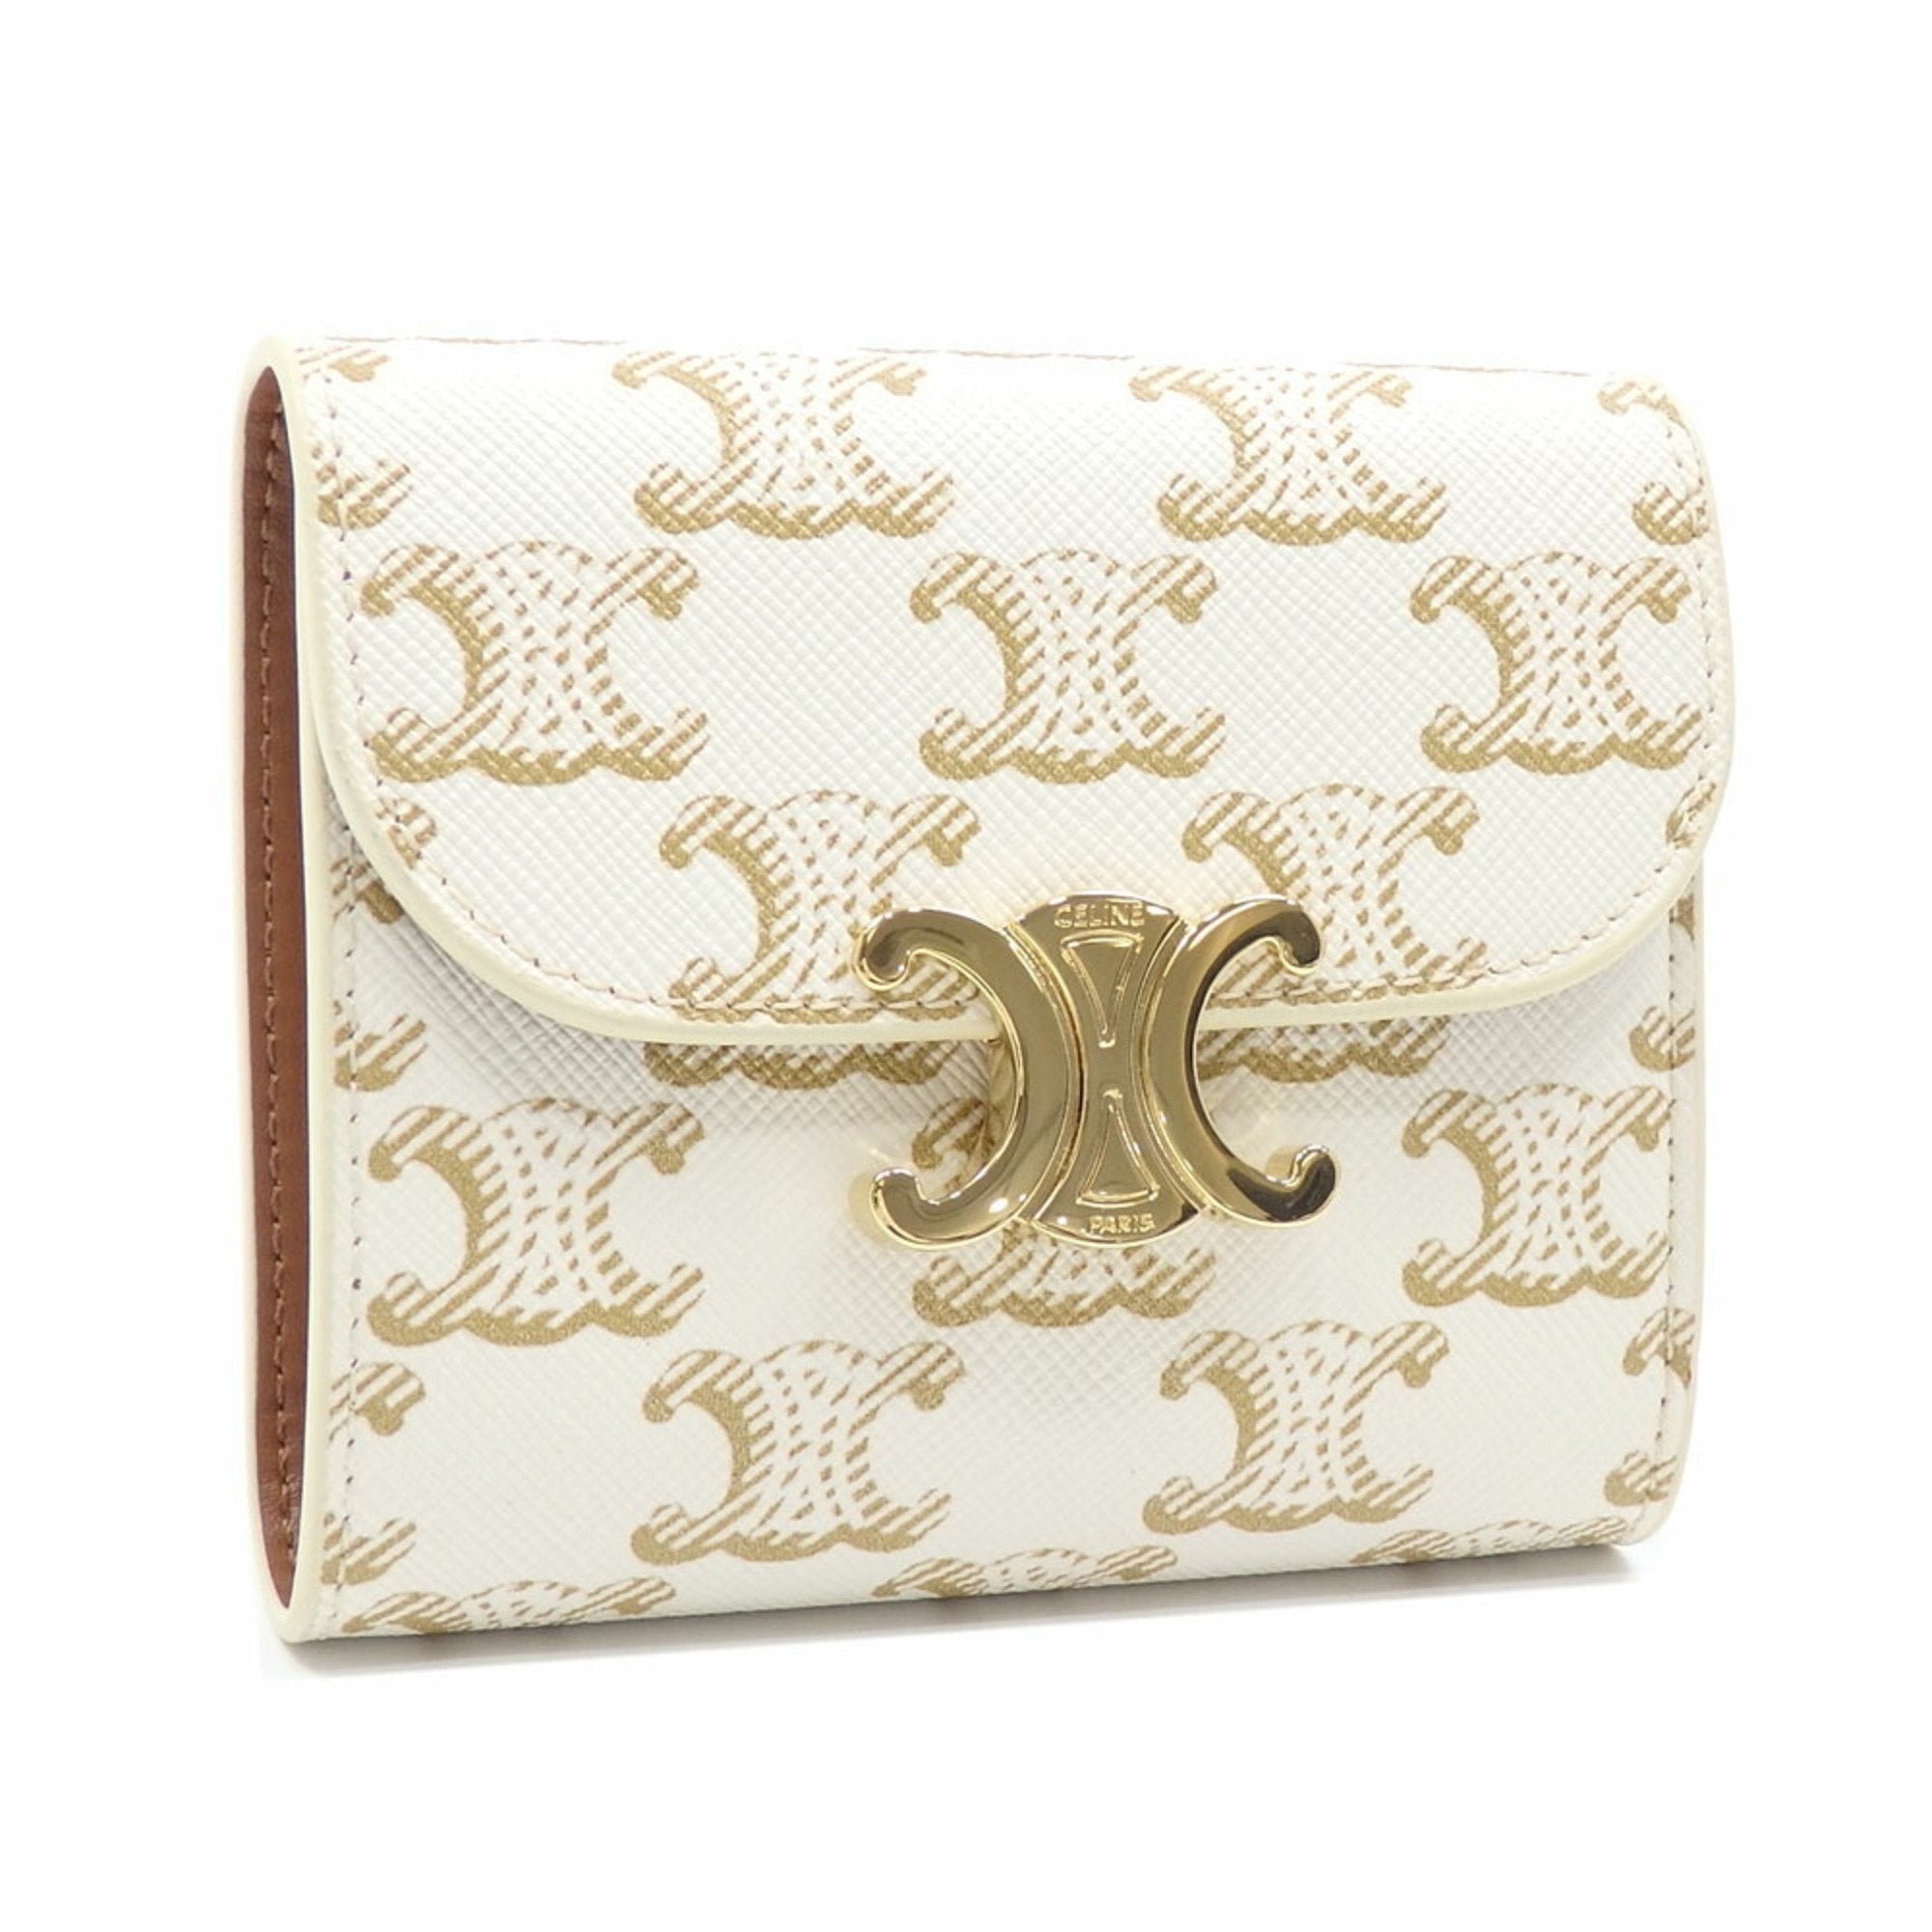 SMALL TRIFOLD WALLET IN TRIOMPHE CANVAS AND LAMBSKIN - WHITE/TAN